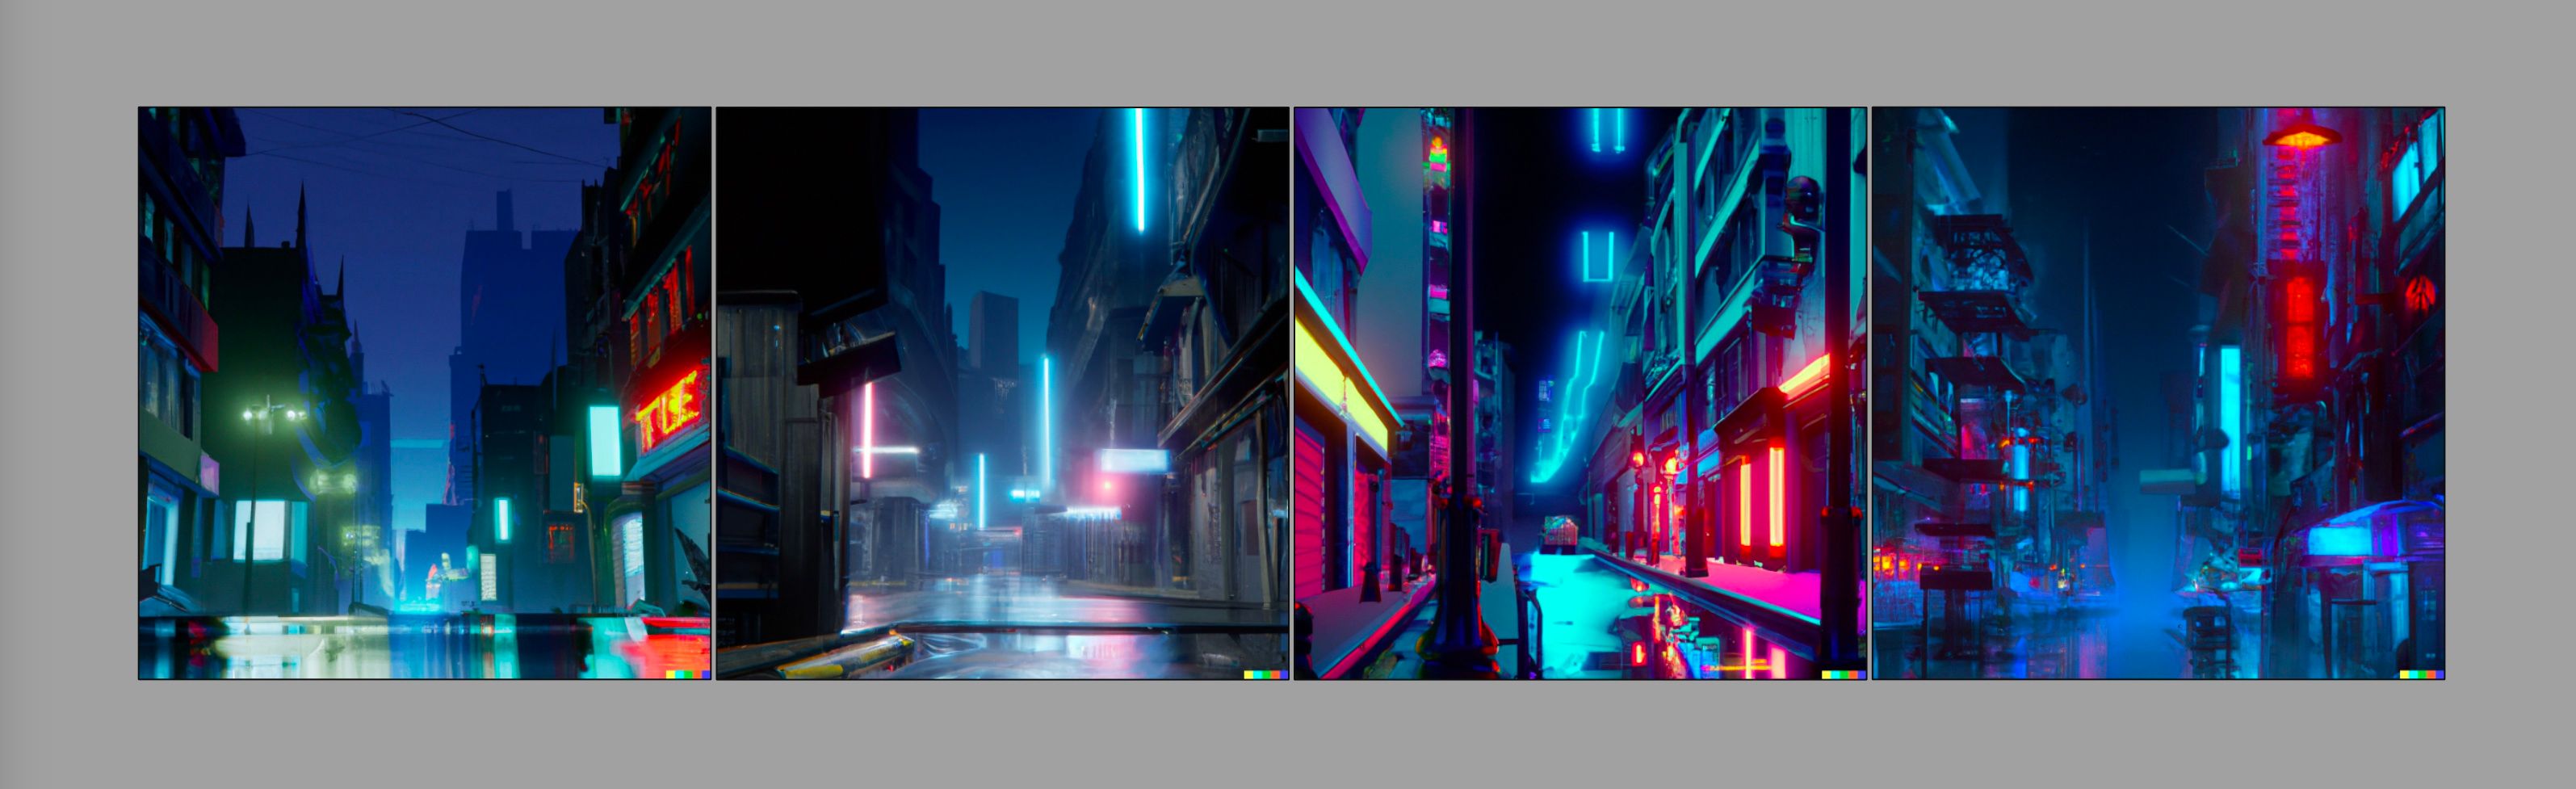 Four images of a cyberpunk style city street, generated with Dall-E